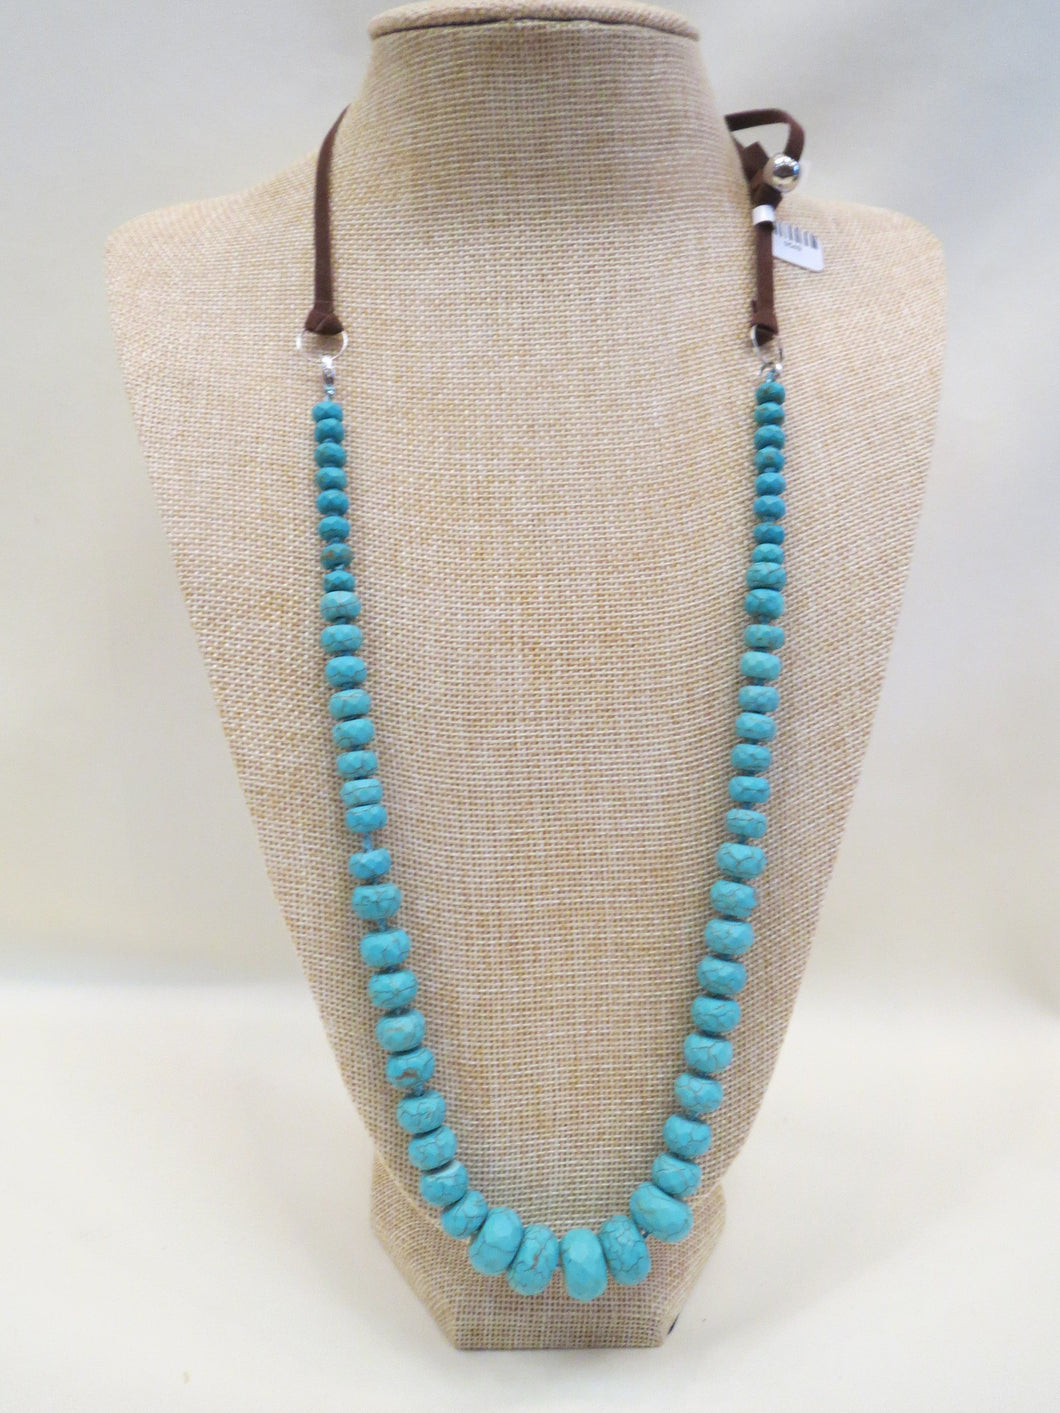 ADO Turquoise Beads Leather Strap Necklace | All Dec'd Out